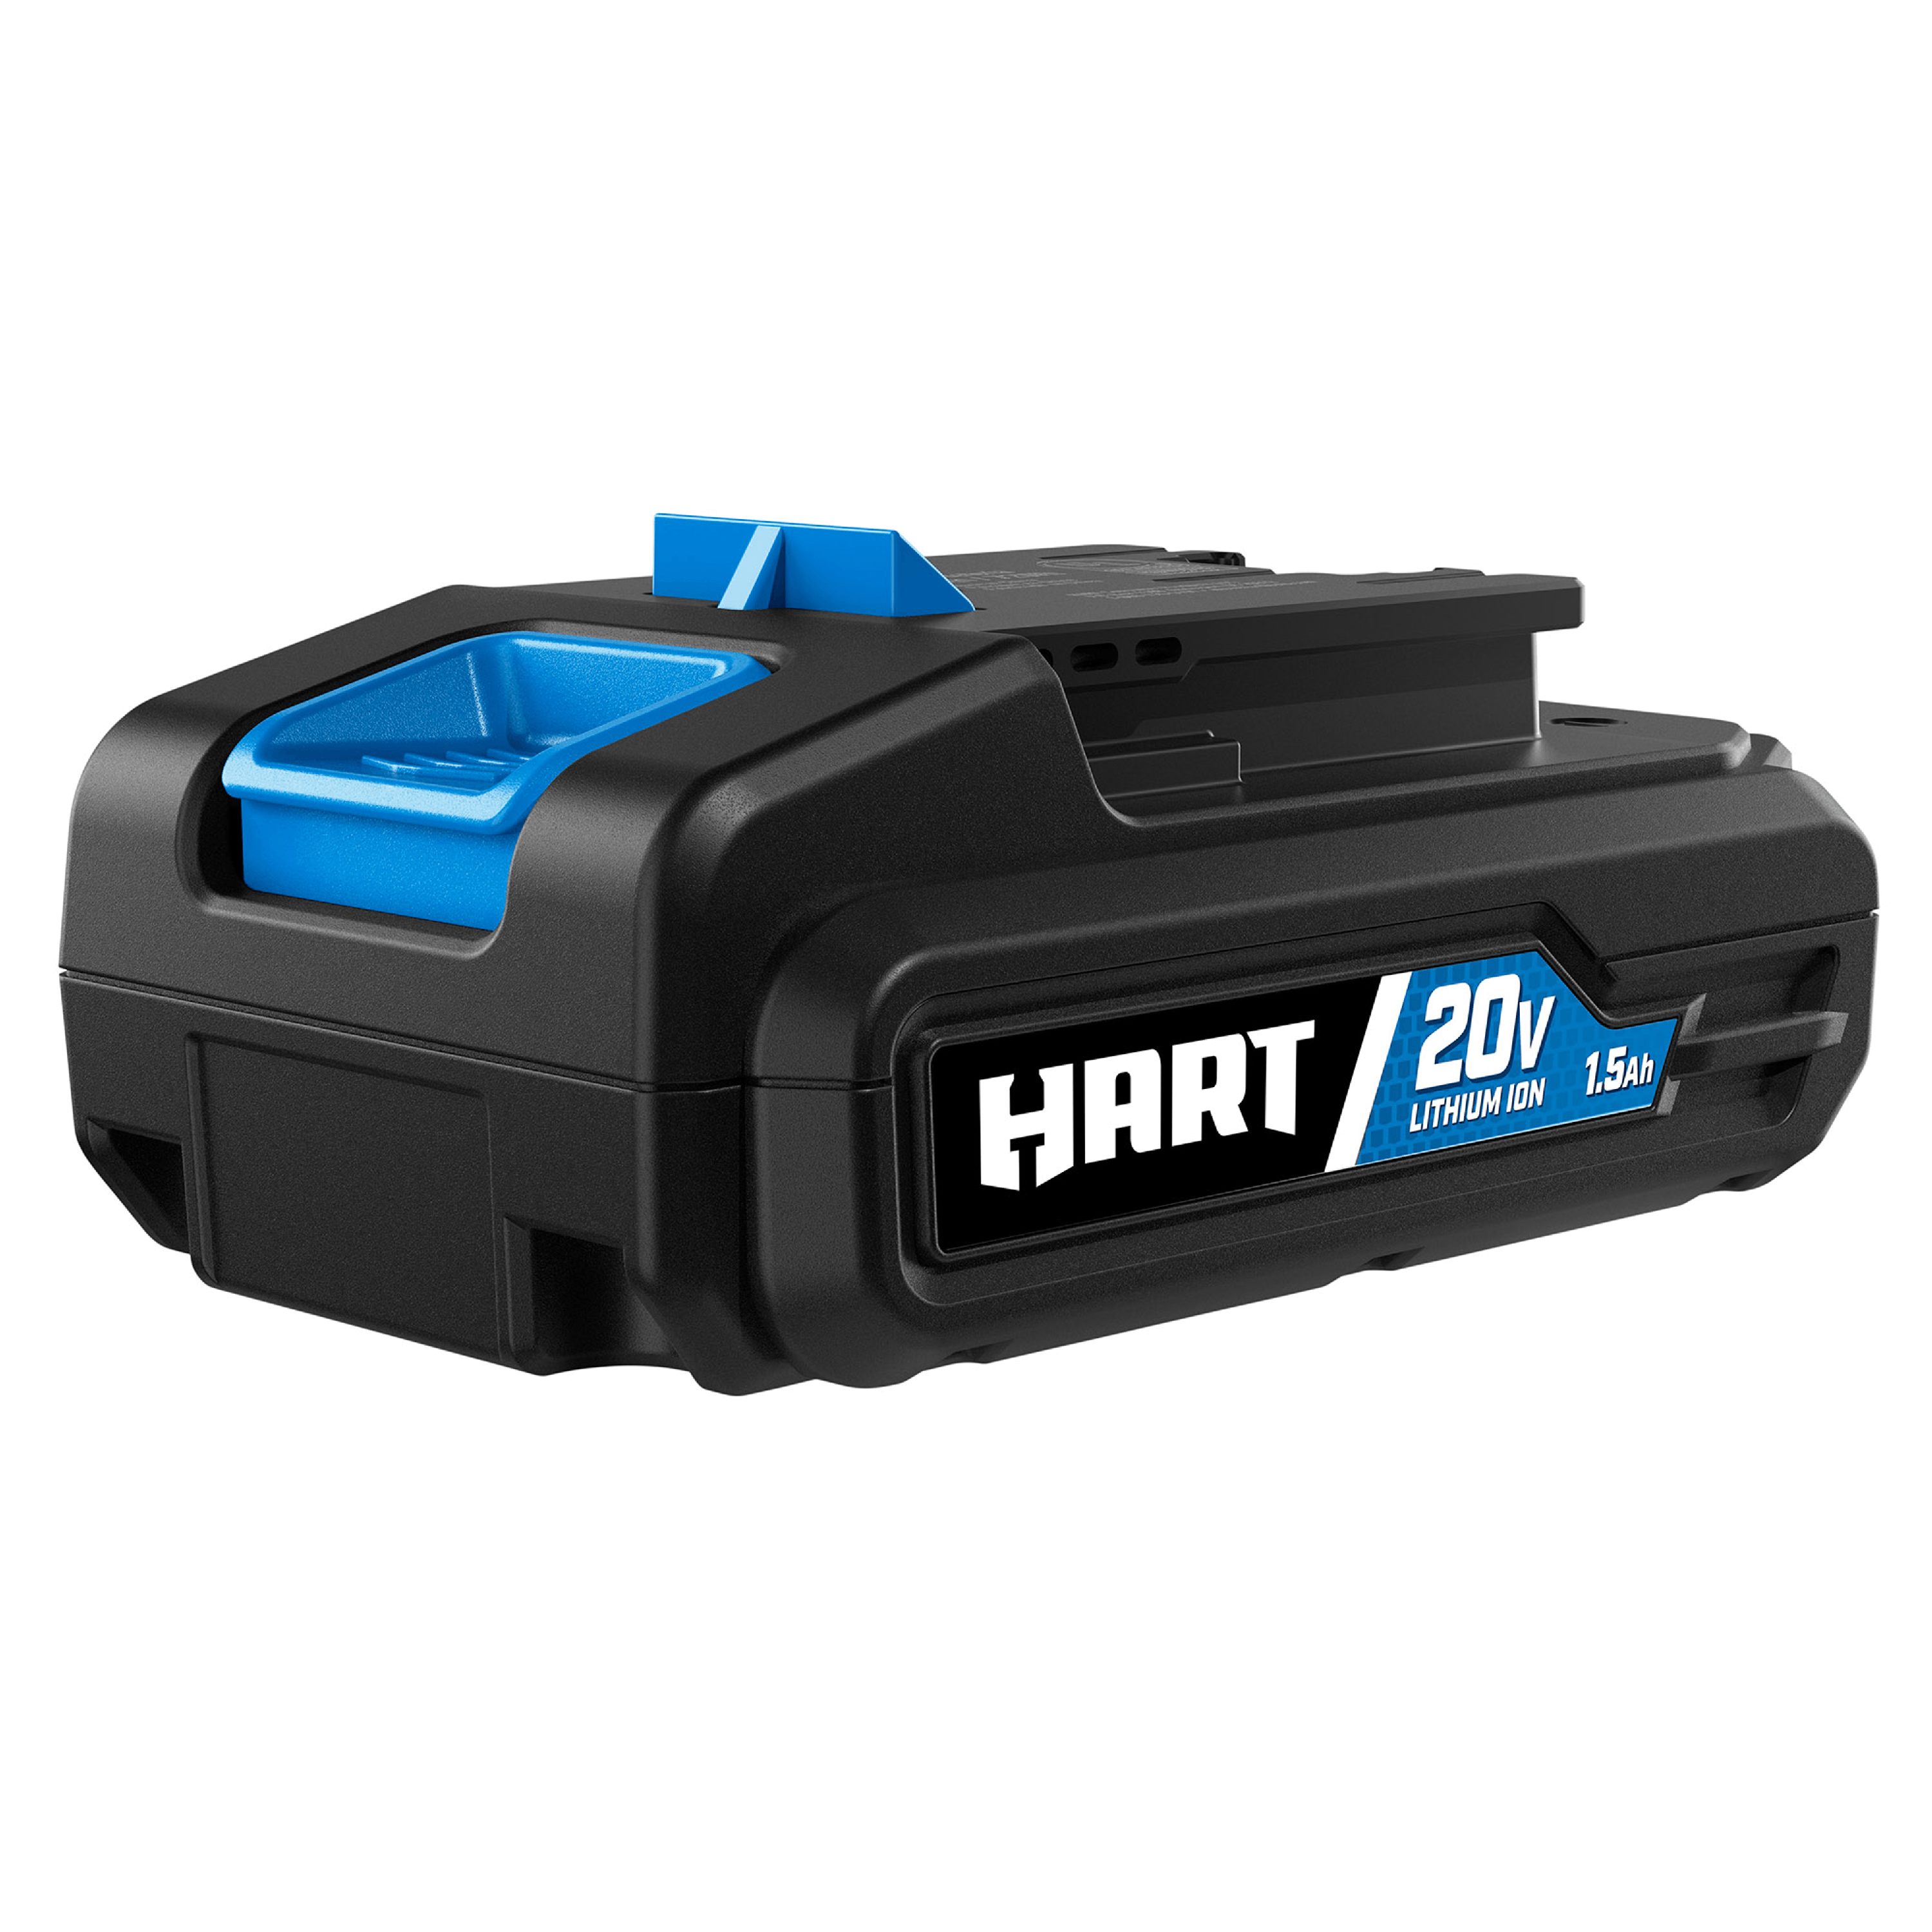 HART 20-Volt Cordless 1/2-inch Hammer Drill Kit (1) 1.5Ah Lithium-Ion Battery - image 5 of 11